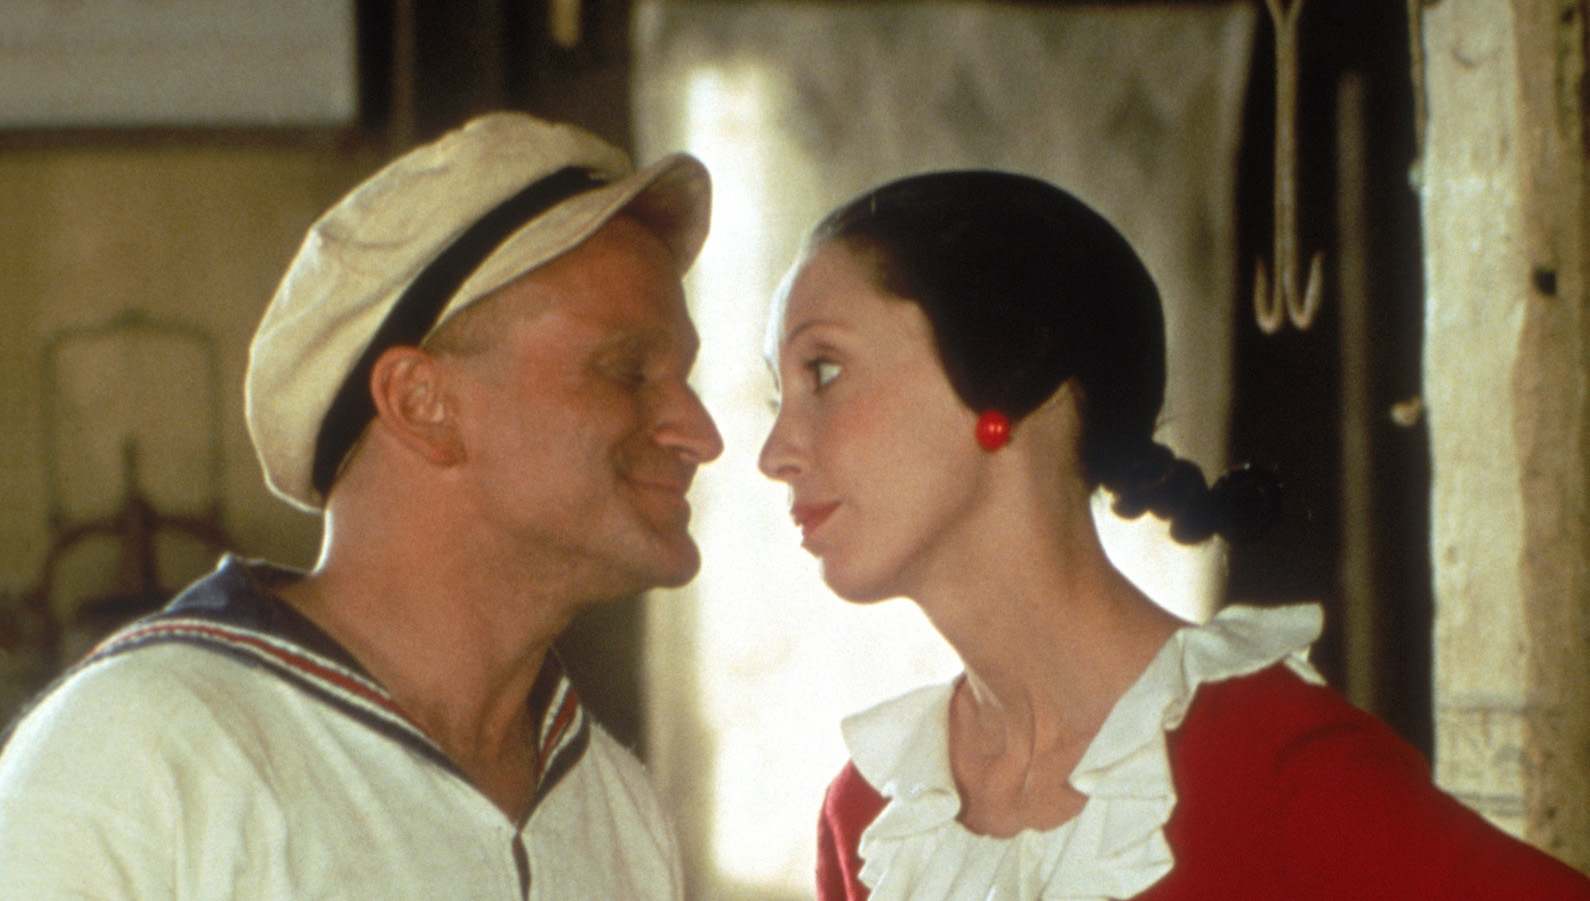 A man in a sailor suit (Popeye) and a woman with red earrings and a red dress (Olive Oyl) look each other in the eye.